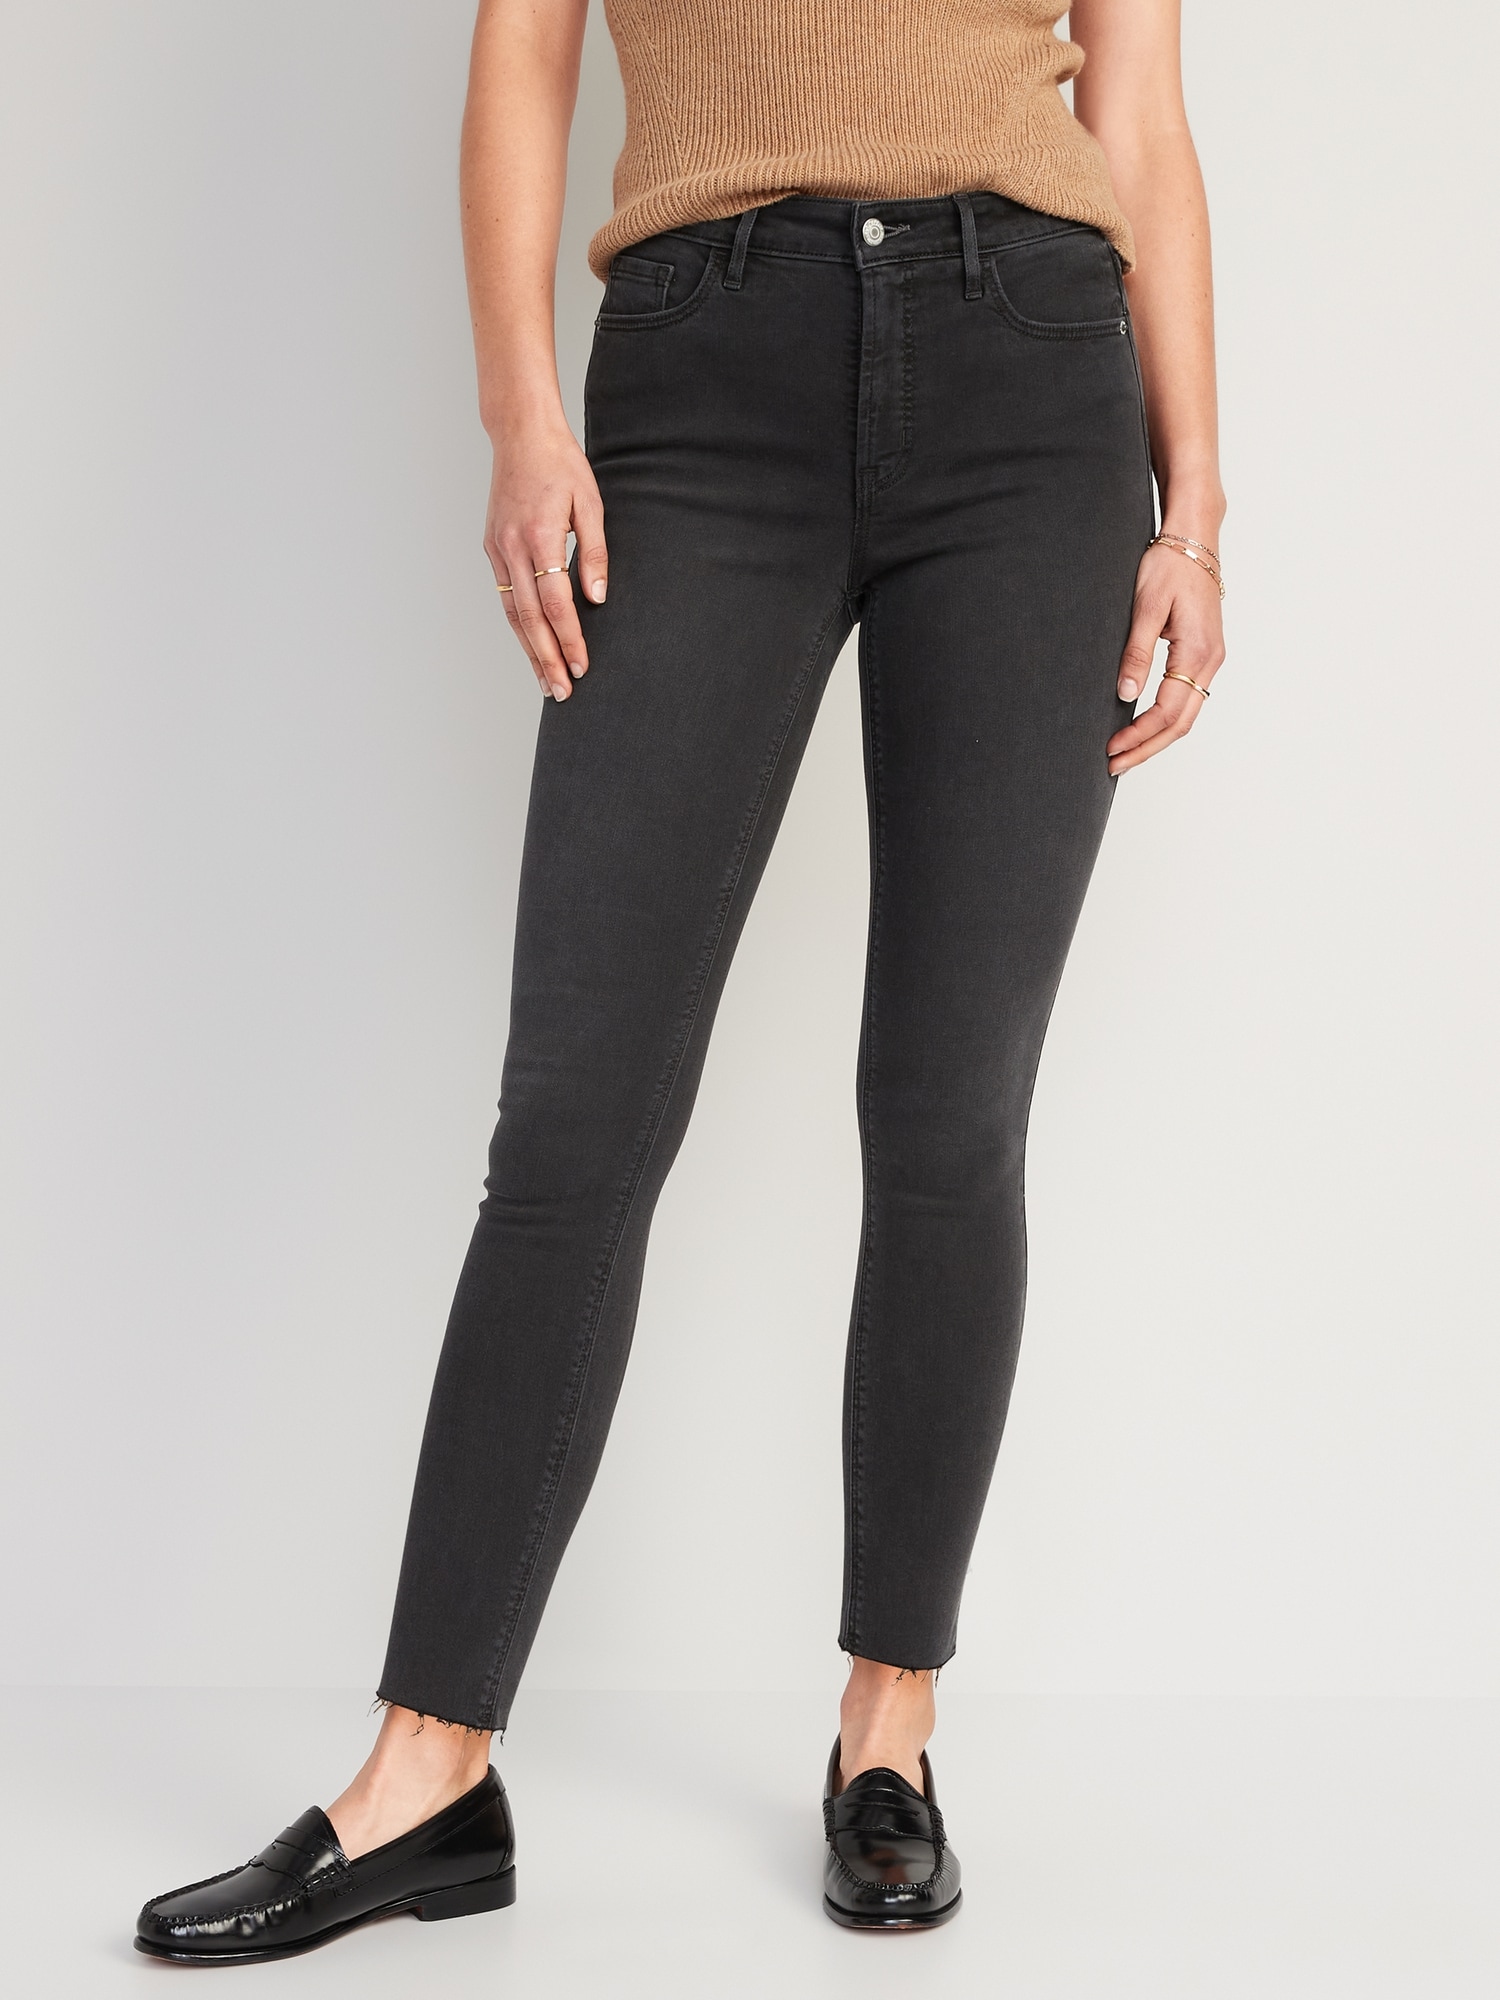 Gap Solid Black Jeans Size 16 (Tall) - 68% off